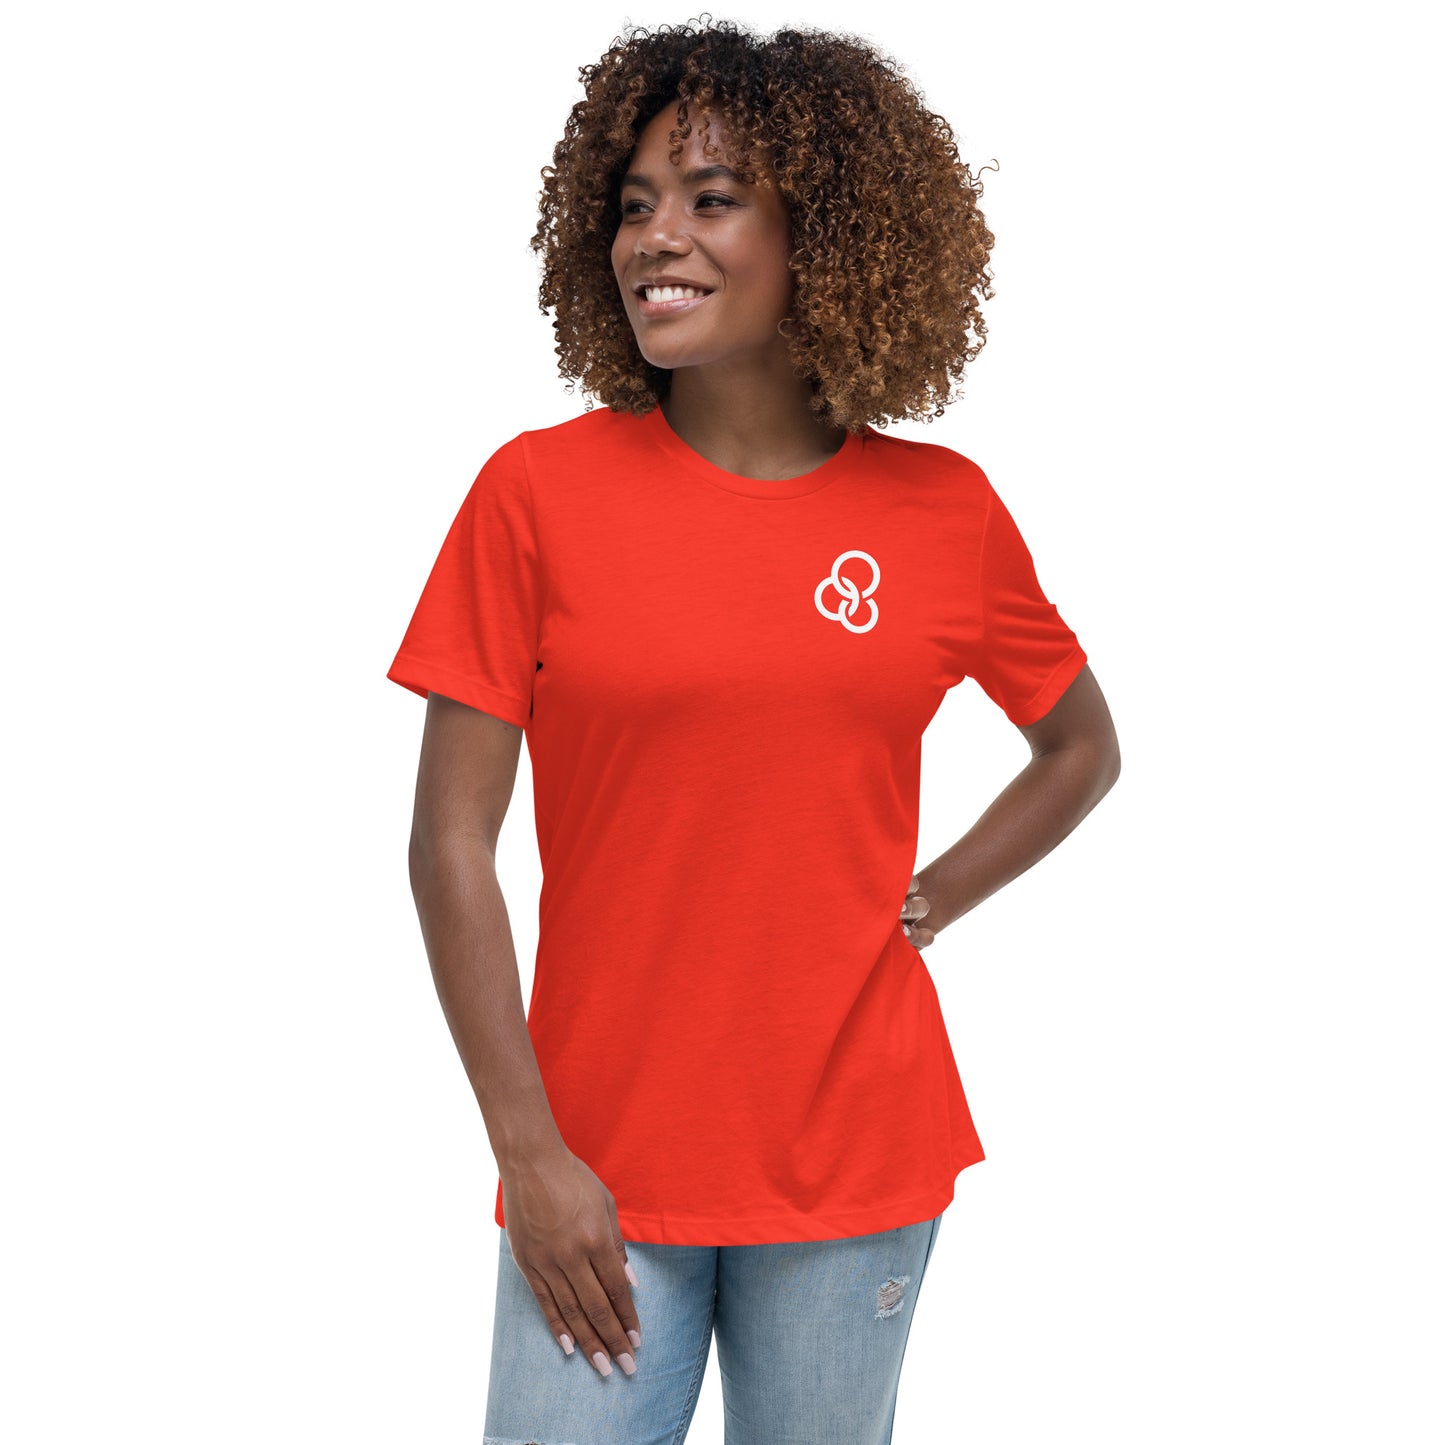 Campus Life Women's Relaxed T-Shirt